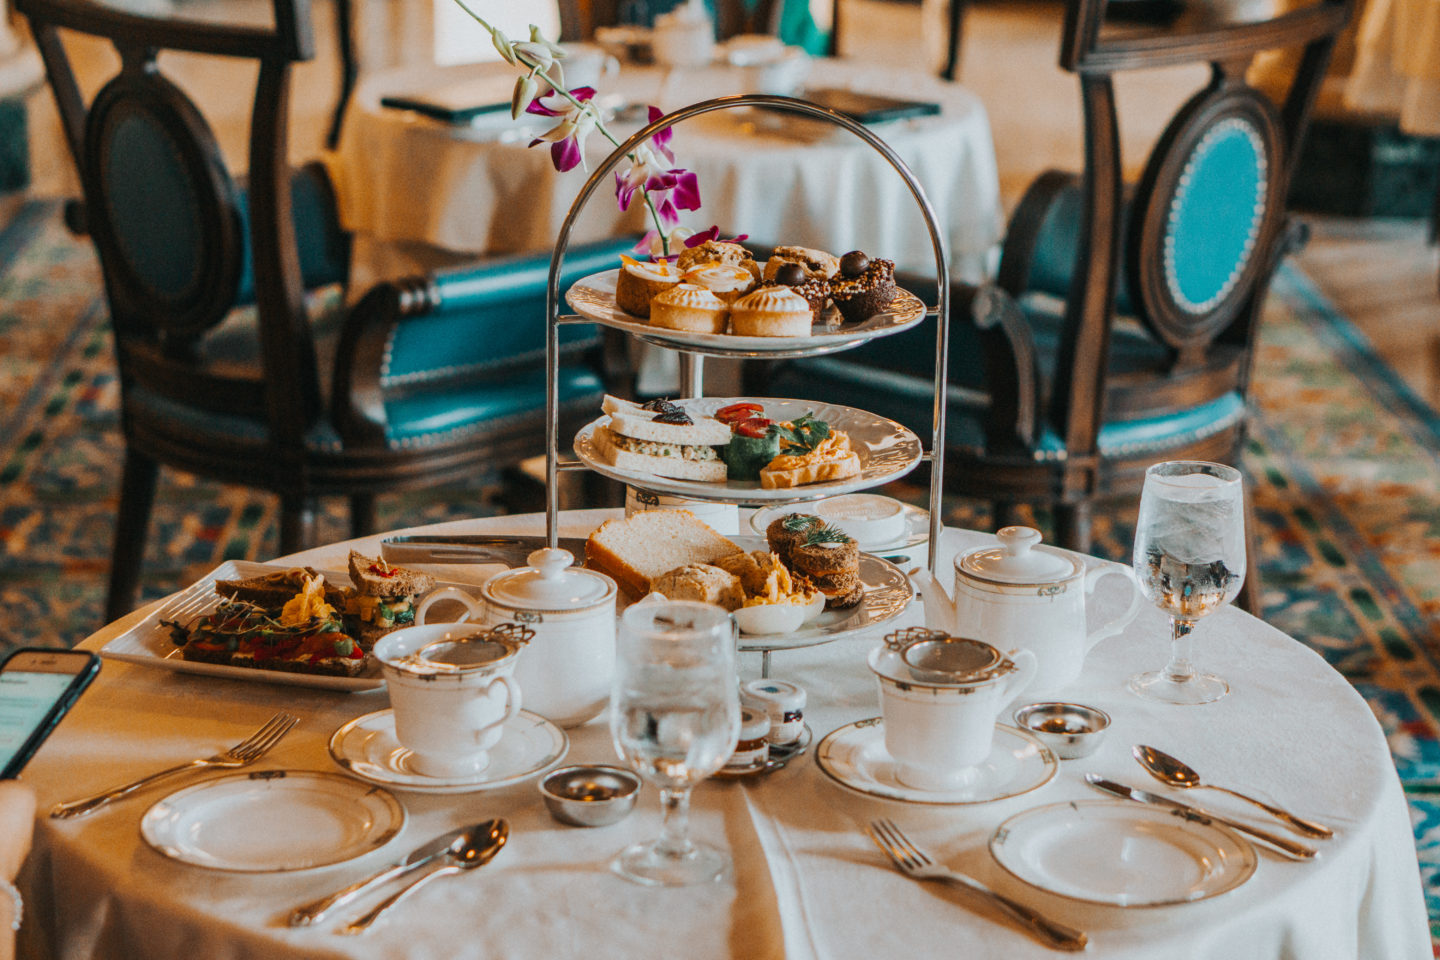 Best afternoon tea in Miami